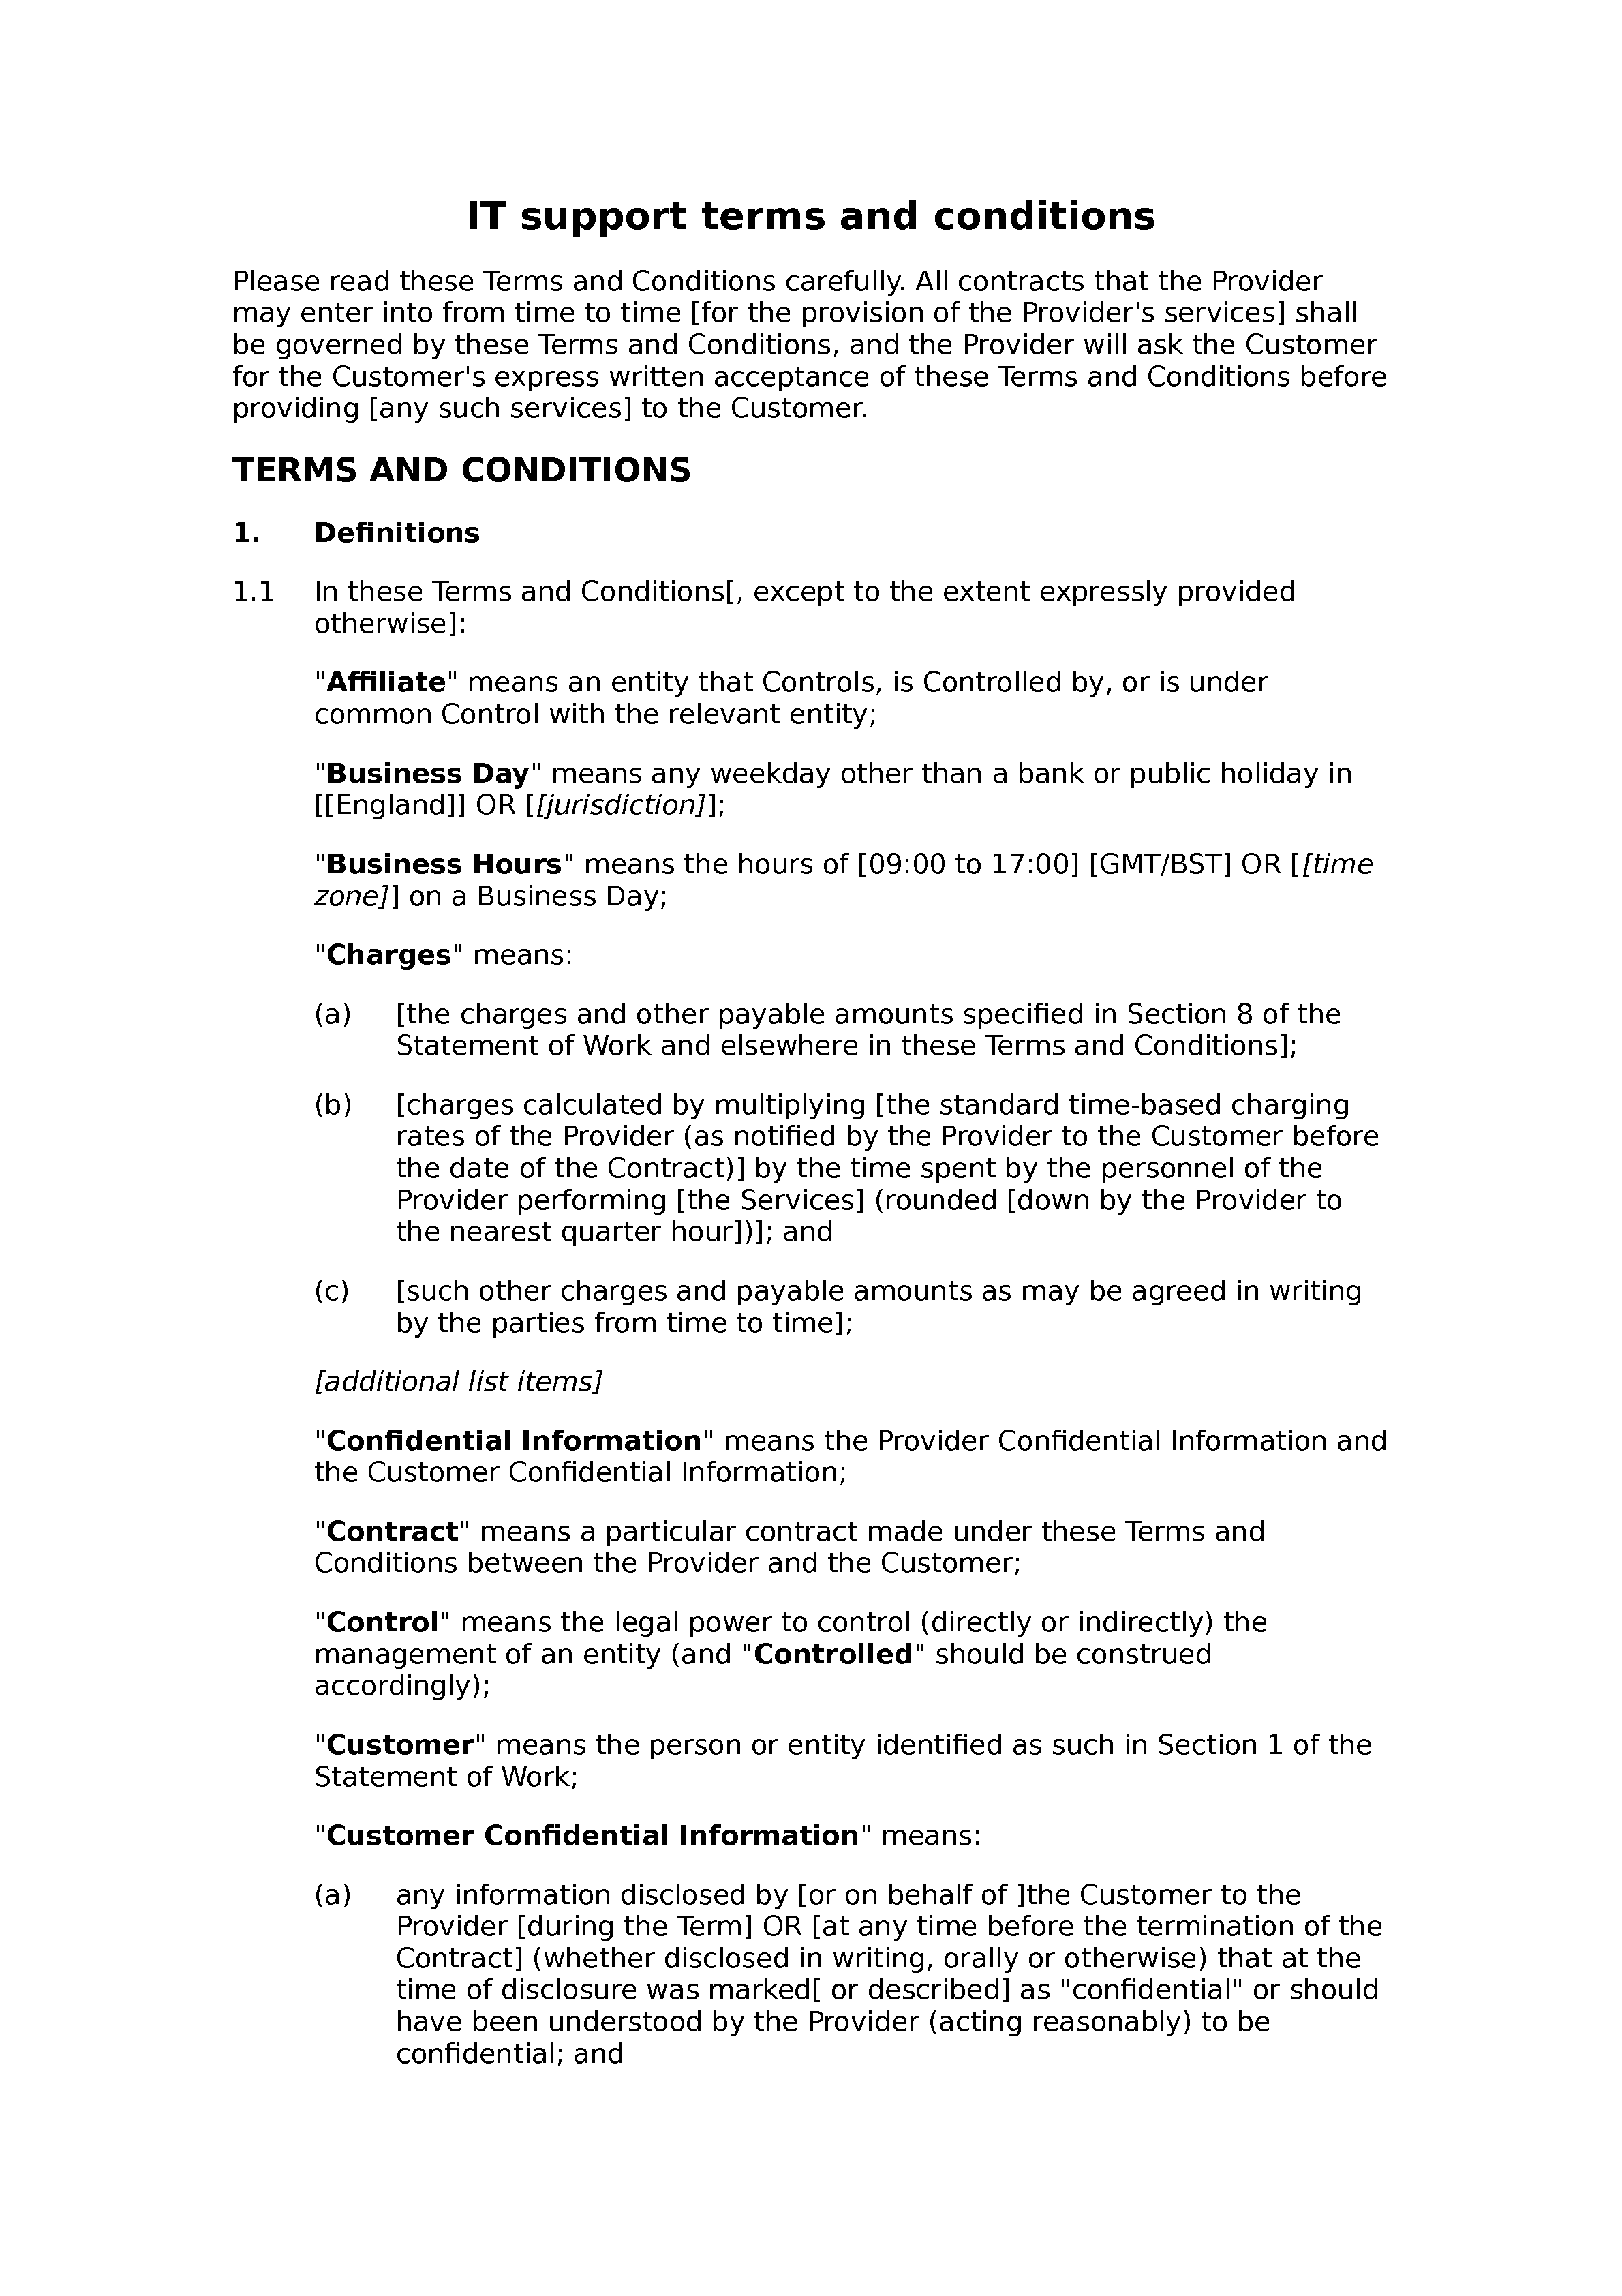 IT support terms and conditions (premium) document preview